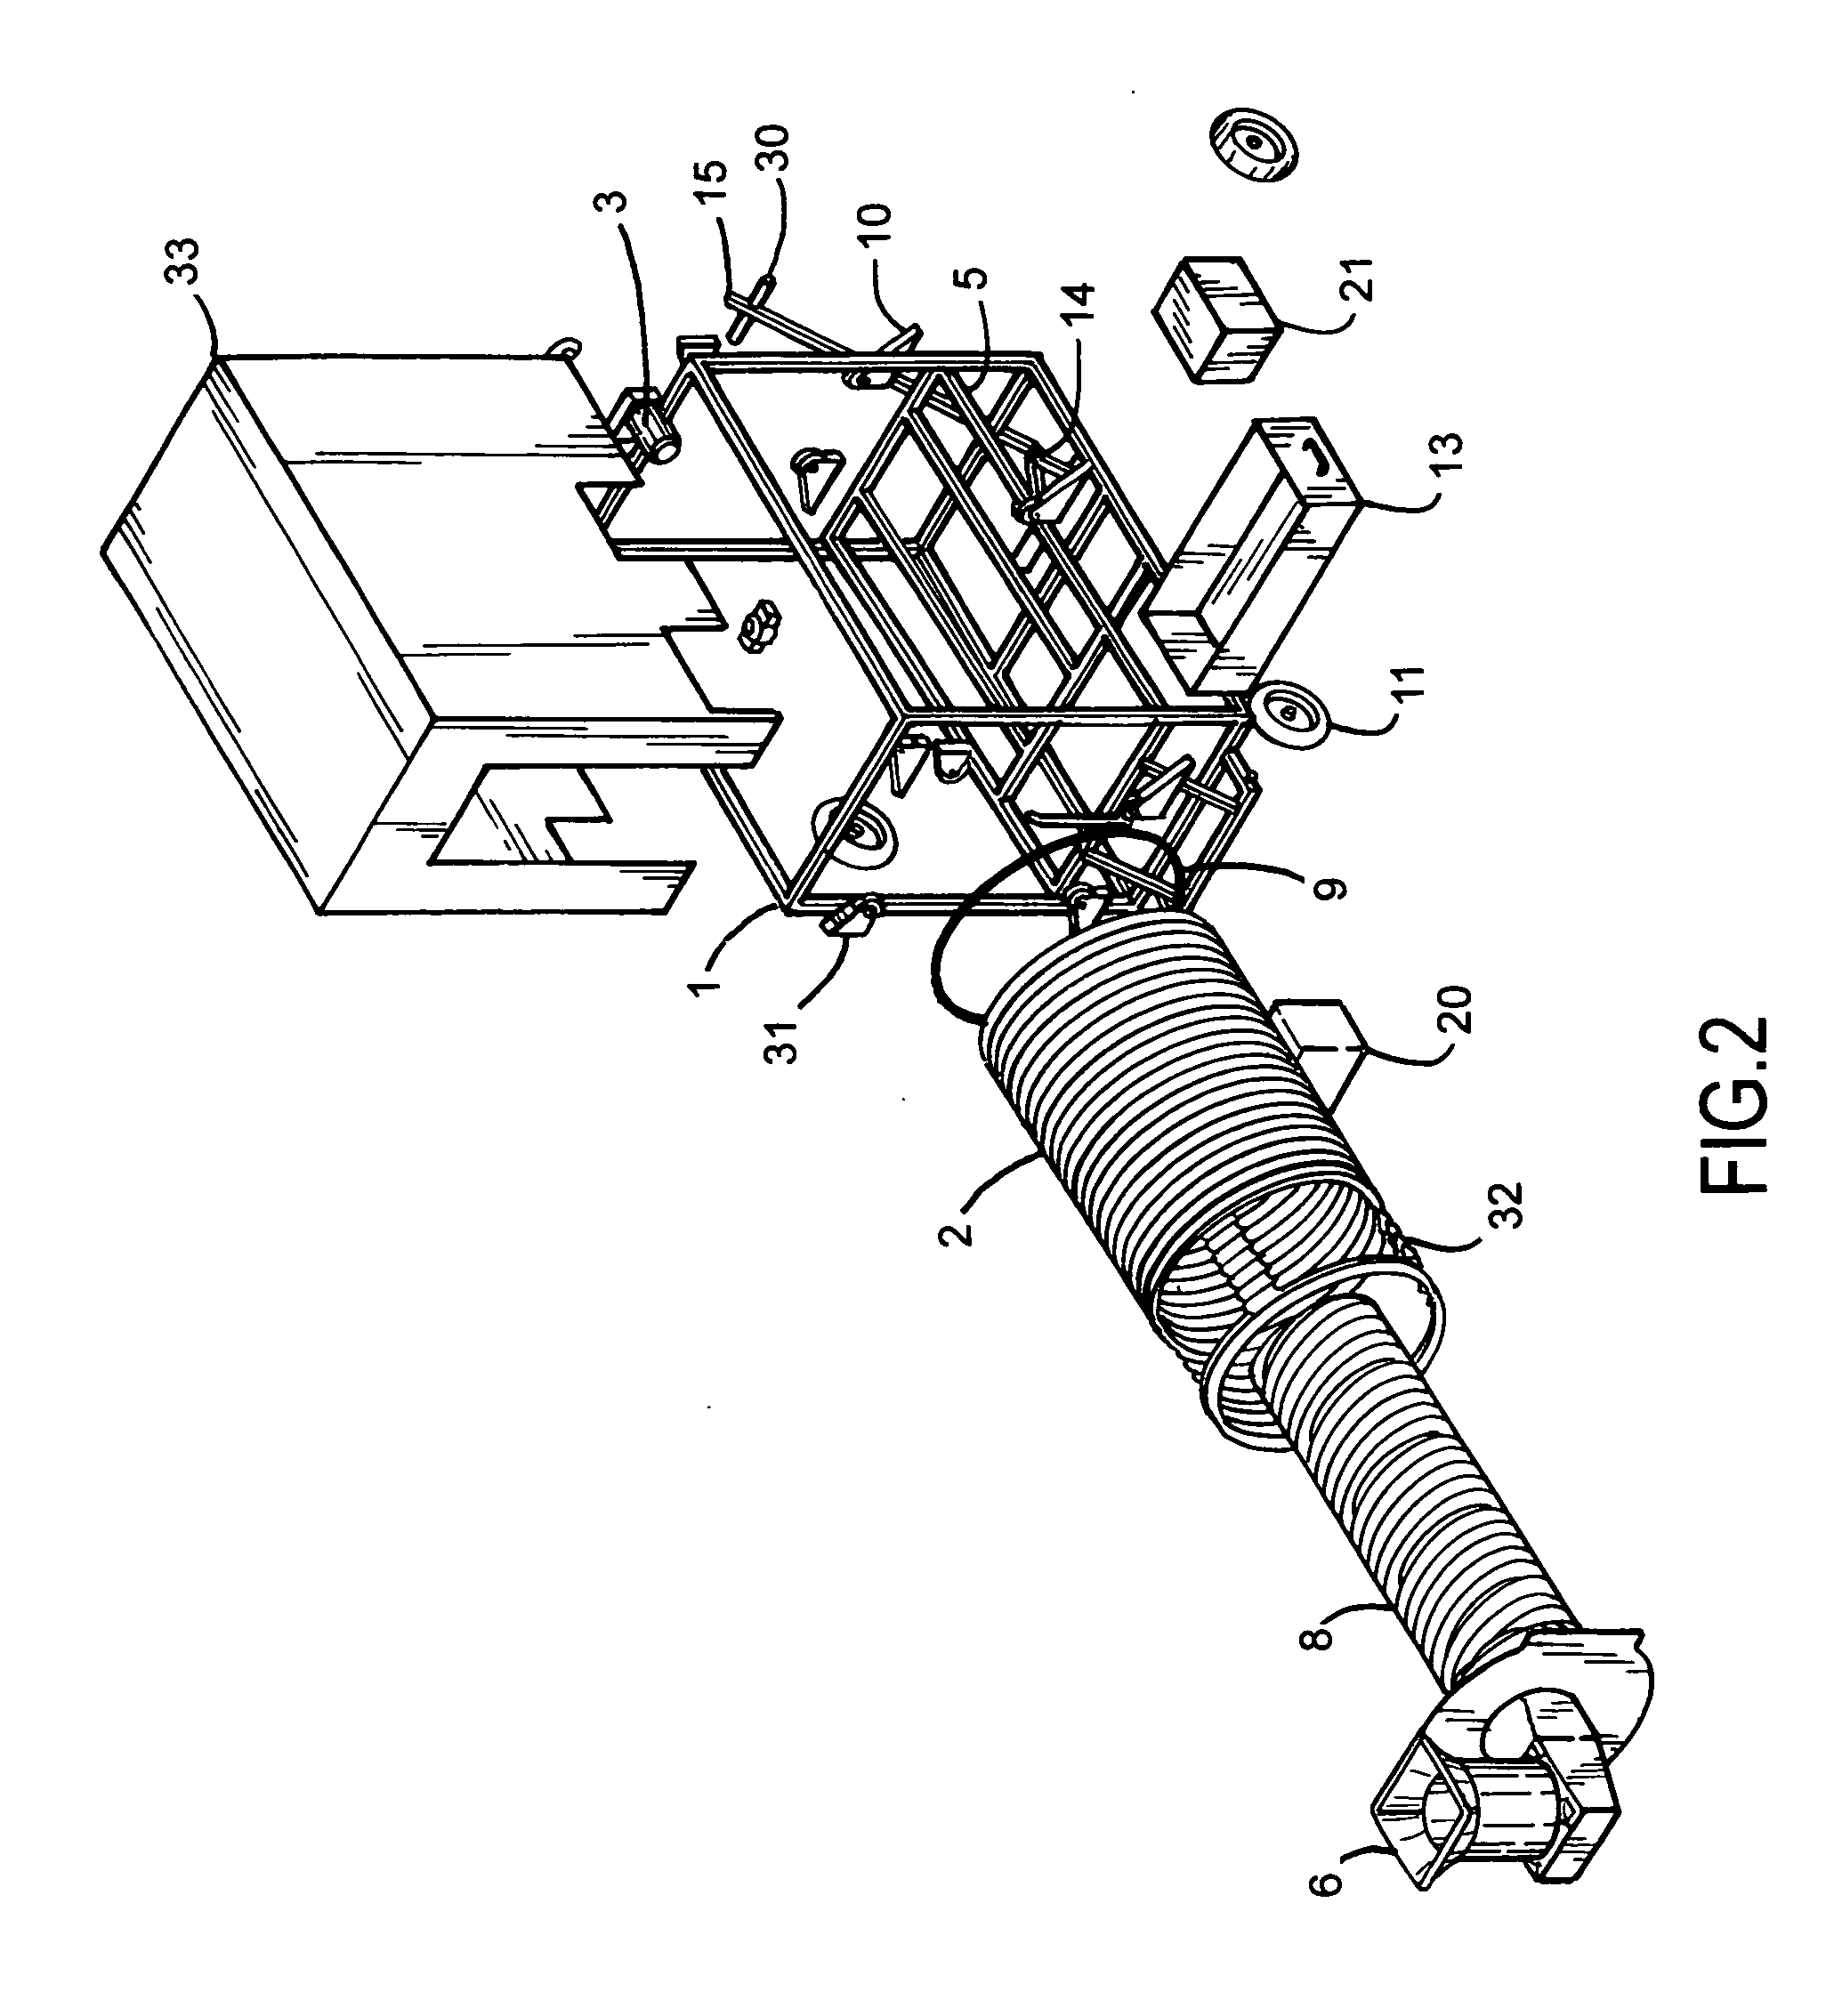 Compositing apparatus and method